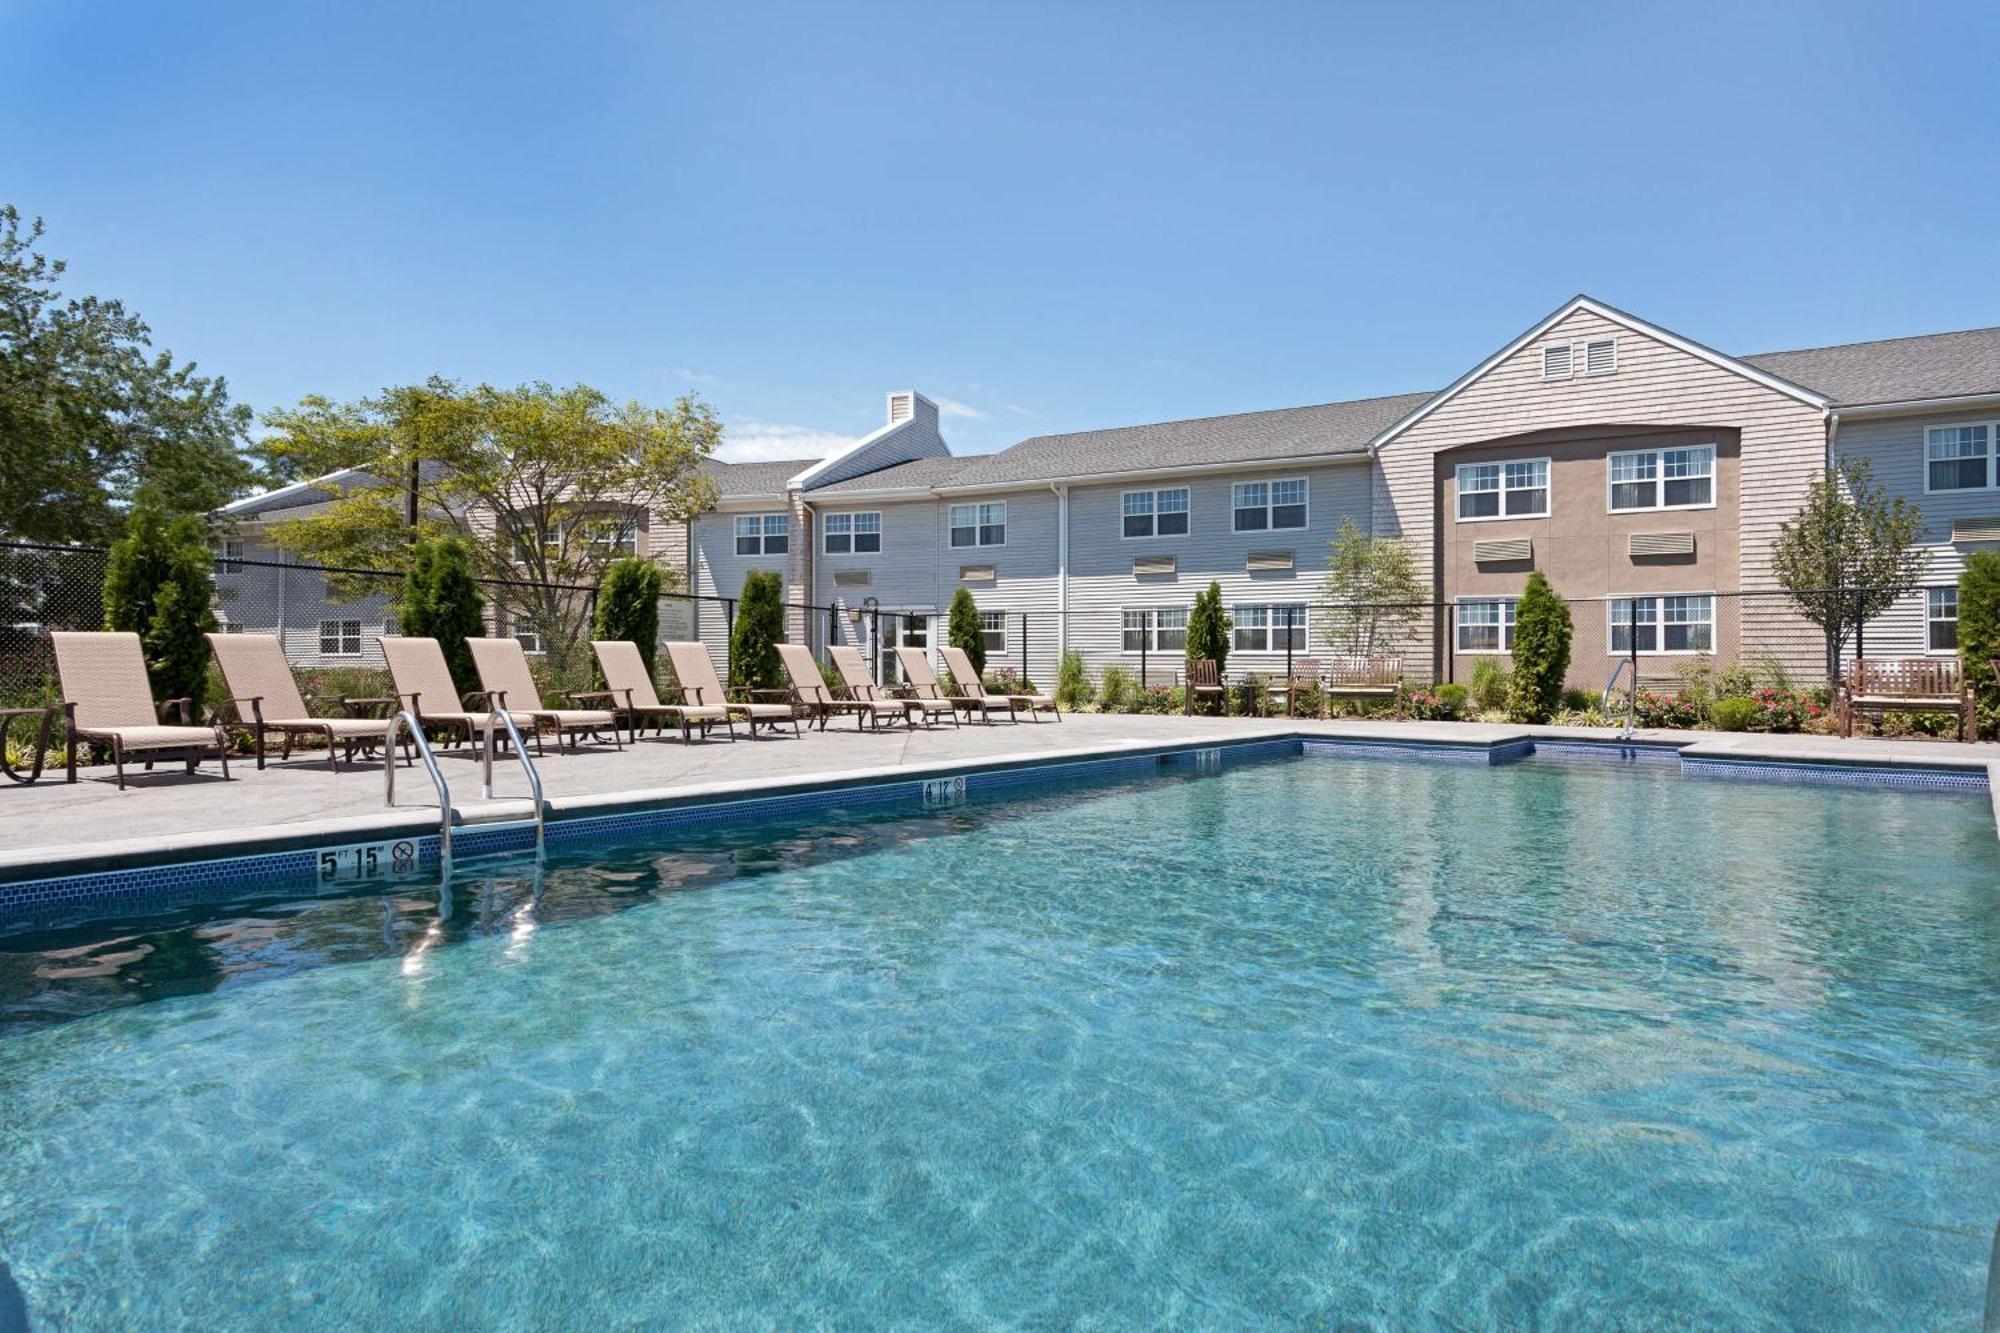 Doubletree By Hilton Cape Cod - Hyannis Hotel Exterior photo